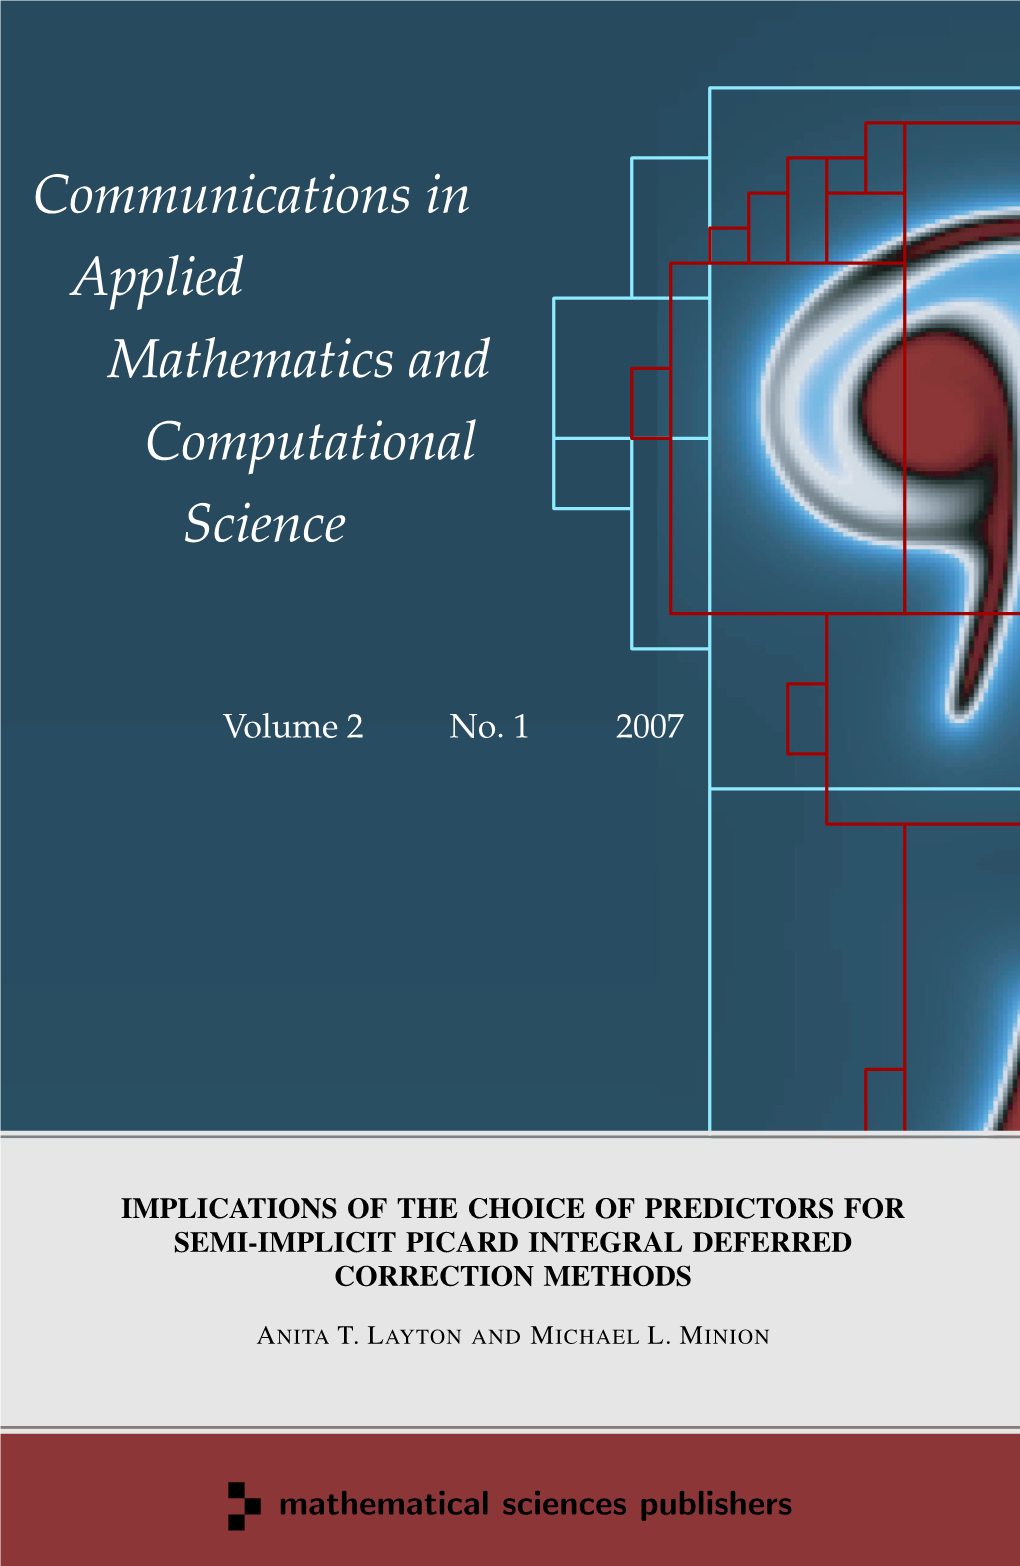 Communications in Applied Mathematics and Computational Science